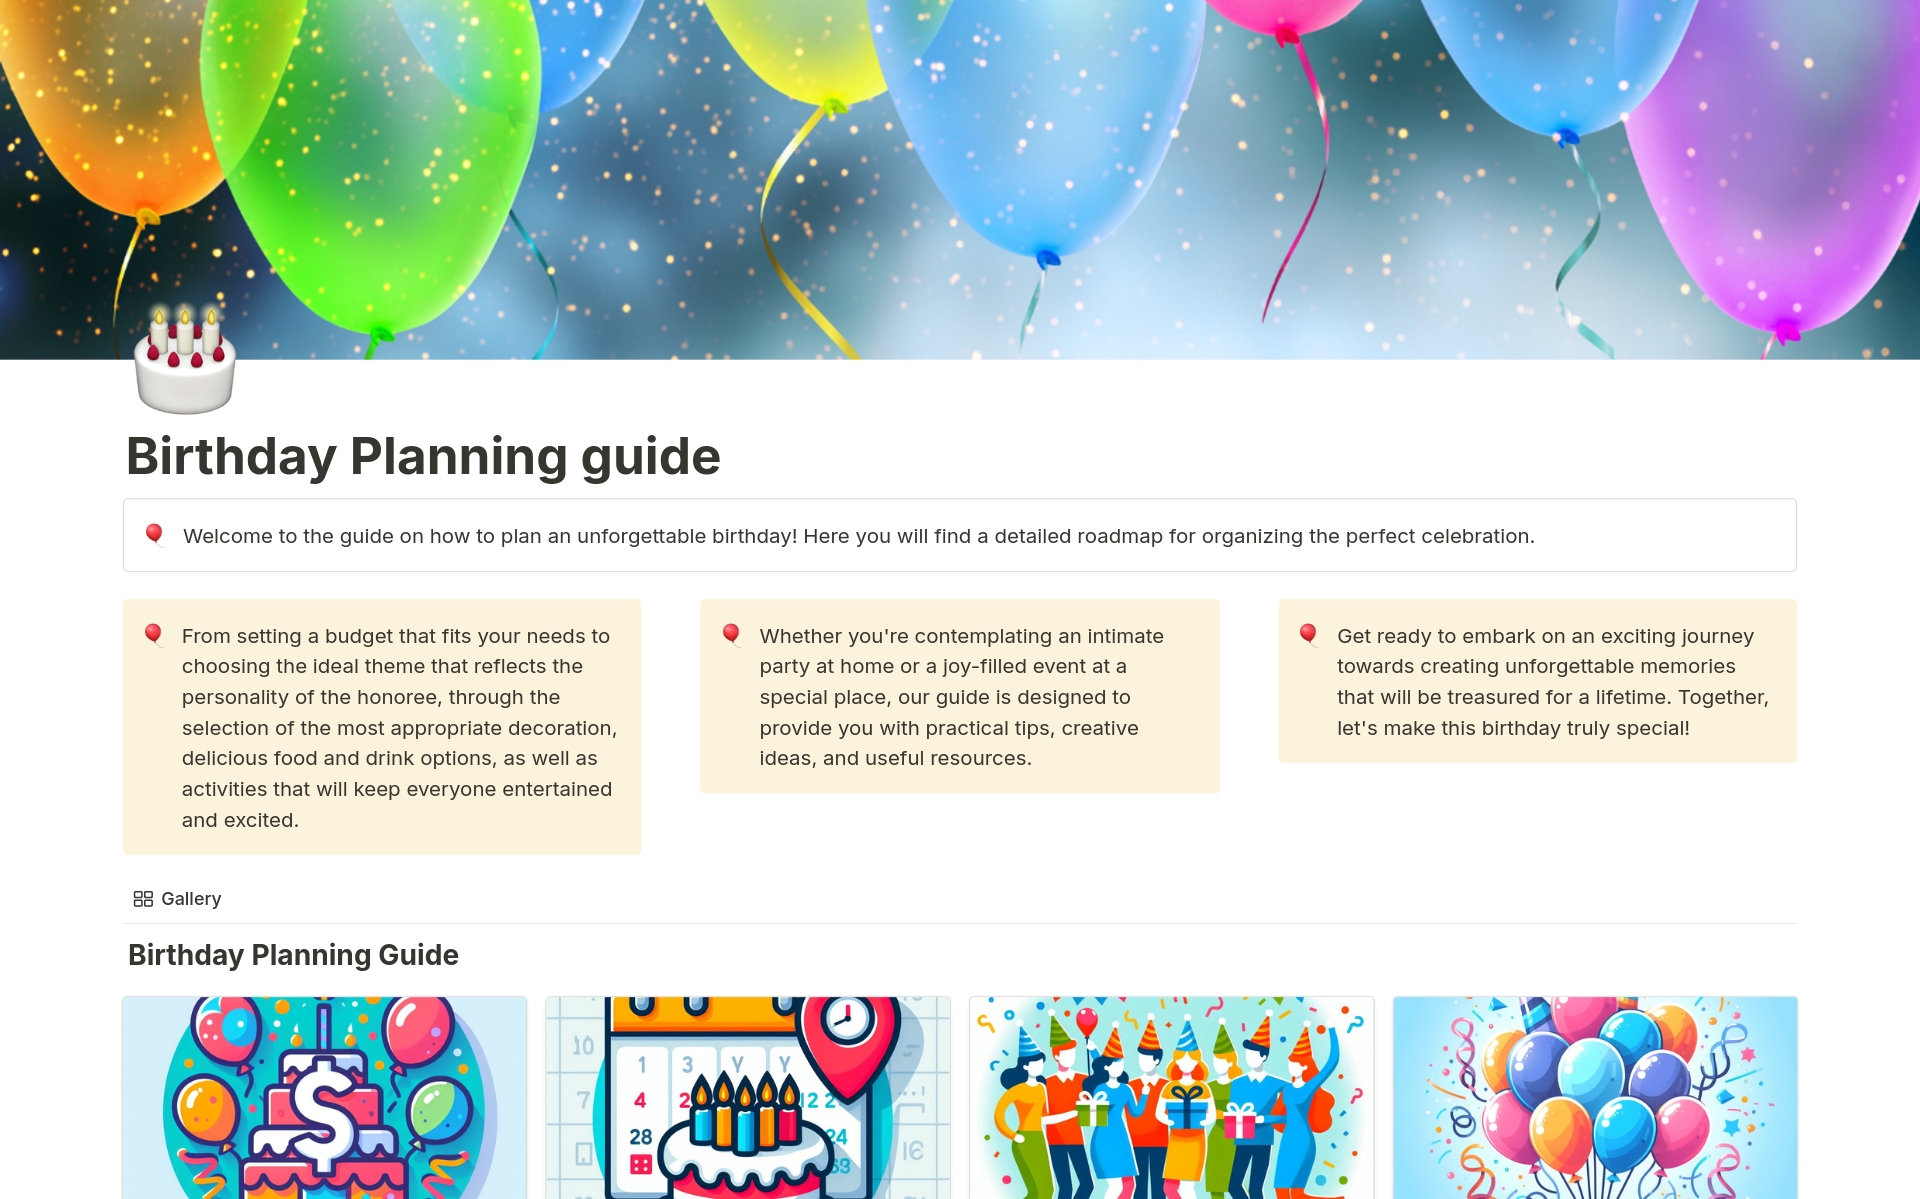 Having a birthday planning guide is essential as it provides an organizational structure and helps you coordinate all aspects of the celebration. From the budget to the theme, food, and activities, a guide ensures you don't forget any detail.